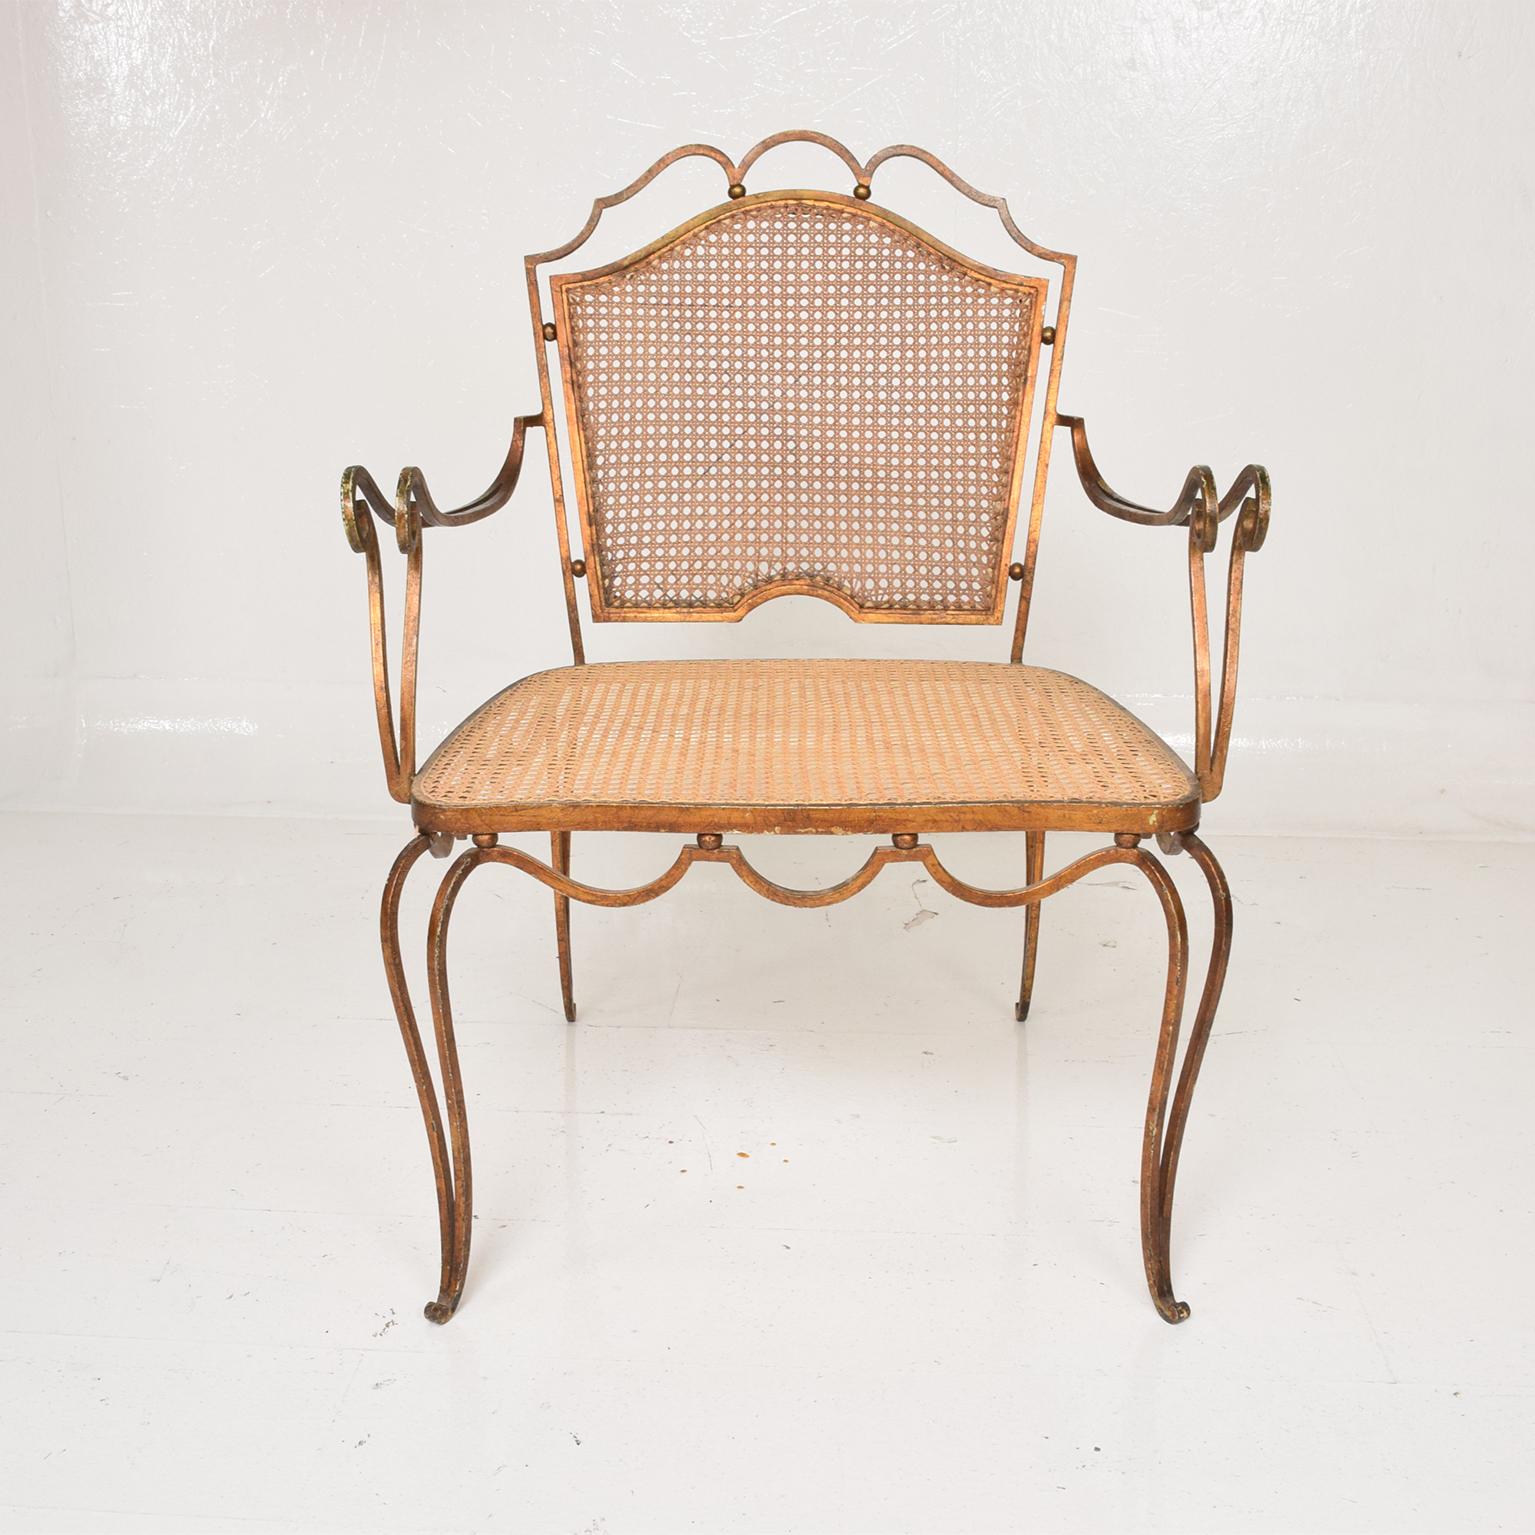 Mid-Century Modern Fanciful Regency Armchair by Arturo Pani in Forged Gilt Iron & Woven Cane 1940s